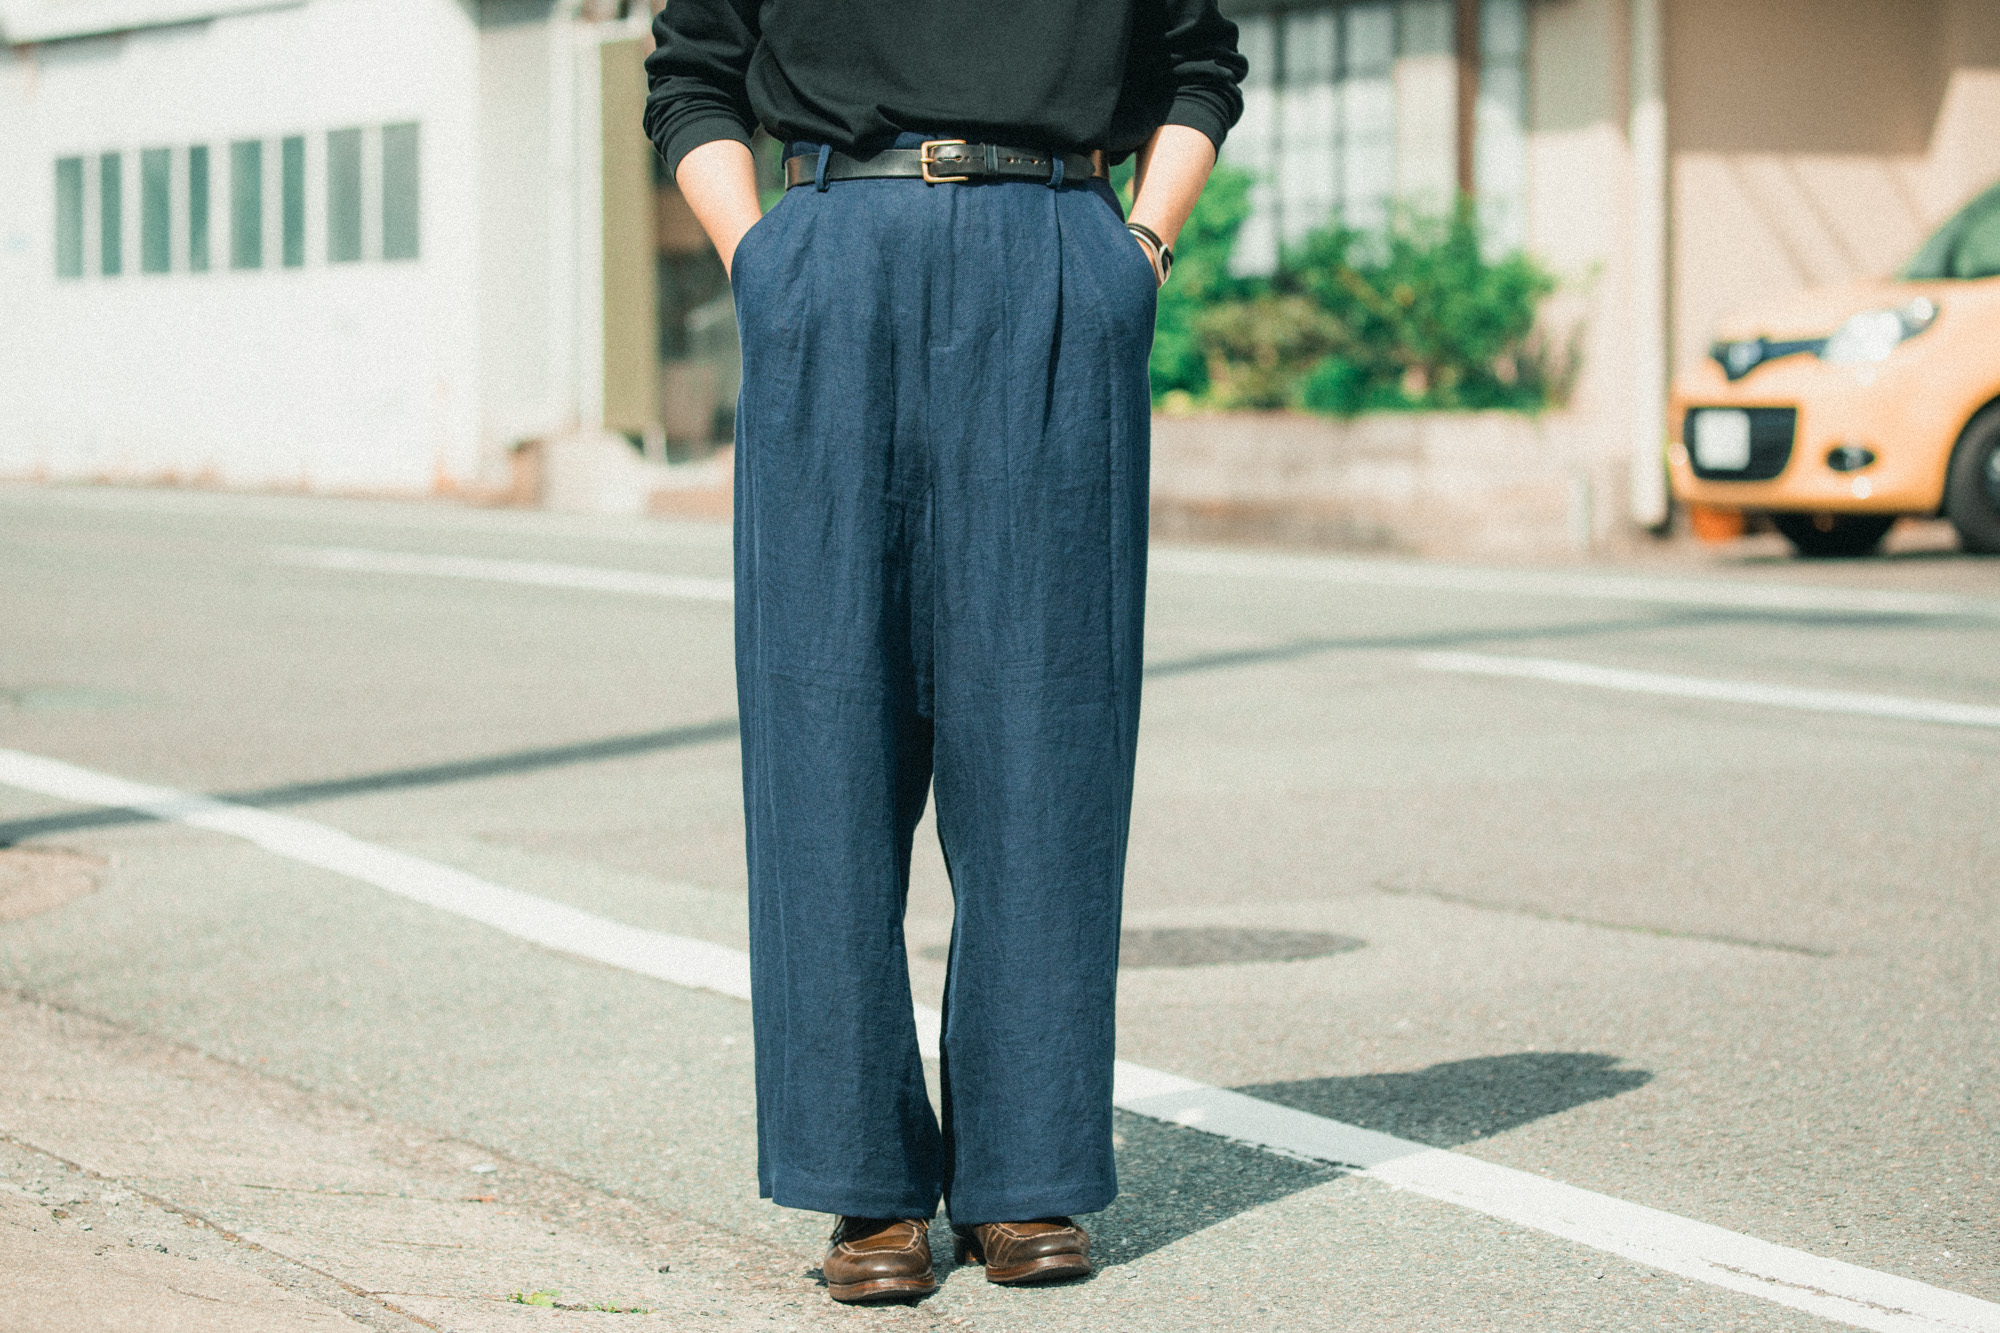 【FRANK LEDER】ワクワクさせてくれる、そんな洋服。FABRIC WASHED LINEN 1 TUCK WIDE TROUSERSのご紹介